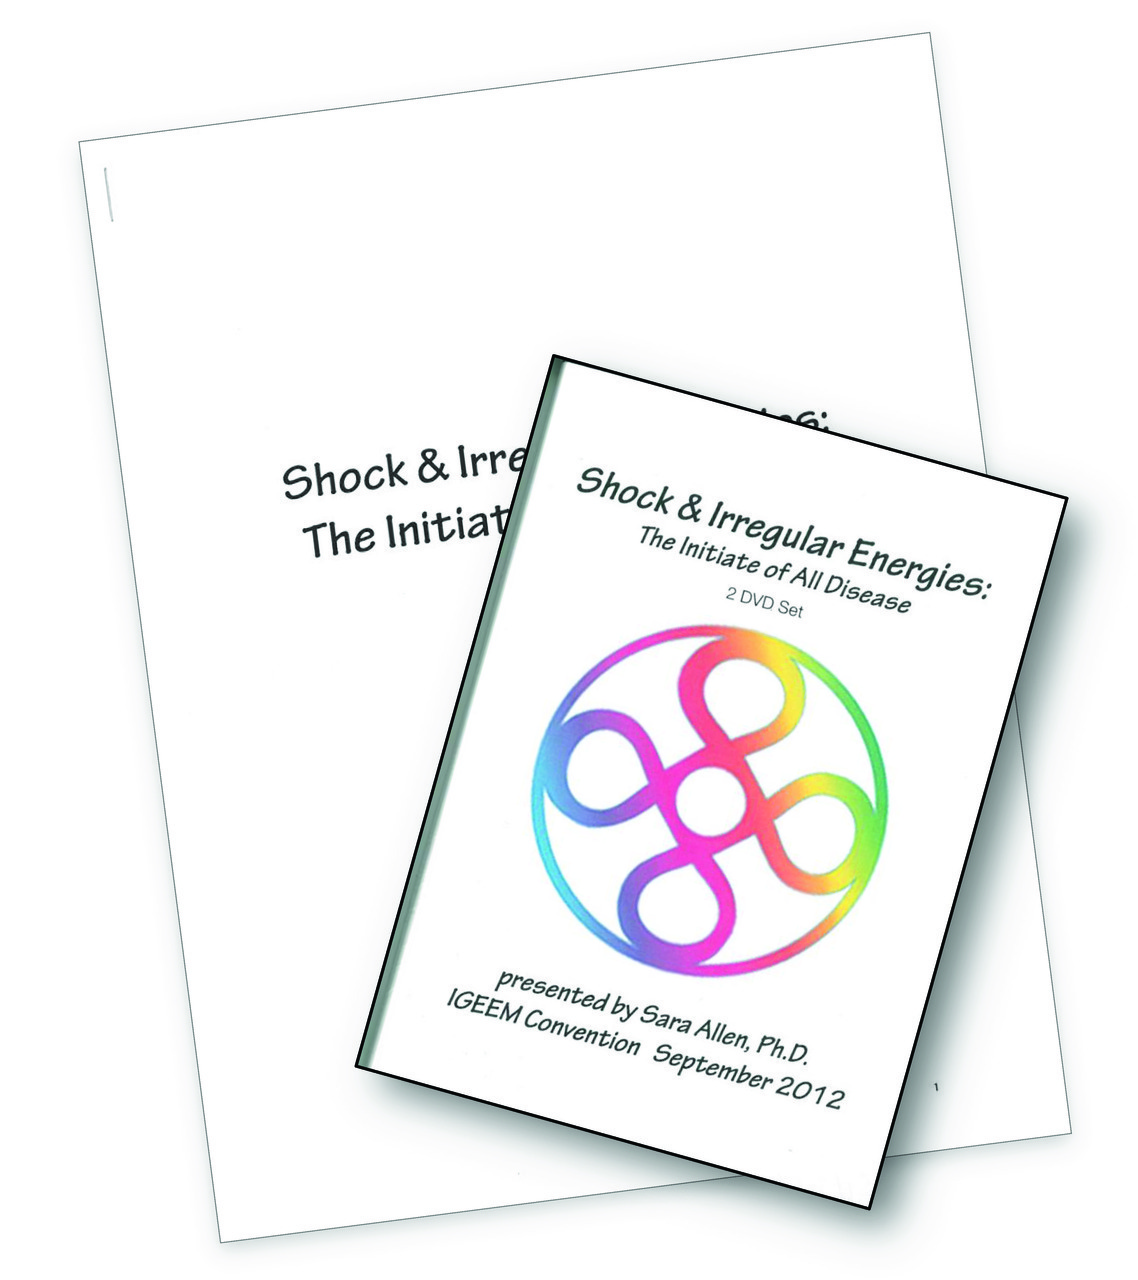 Shock & Irregular Energies: The Initiate of all Disease (2-DVD set with Handout)